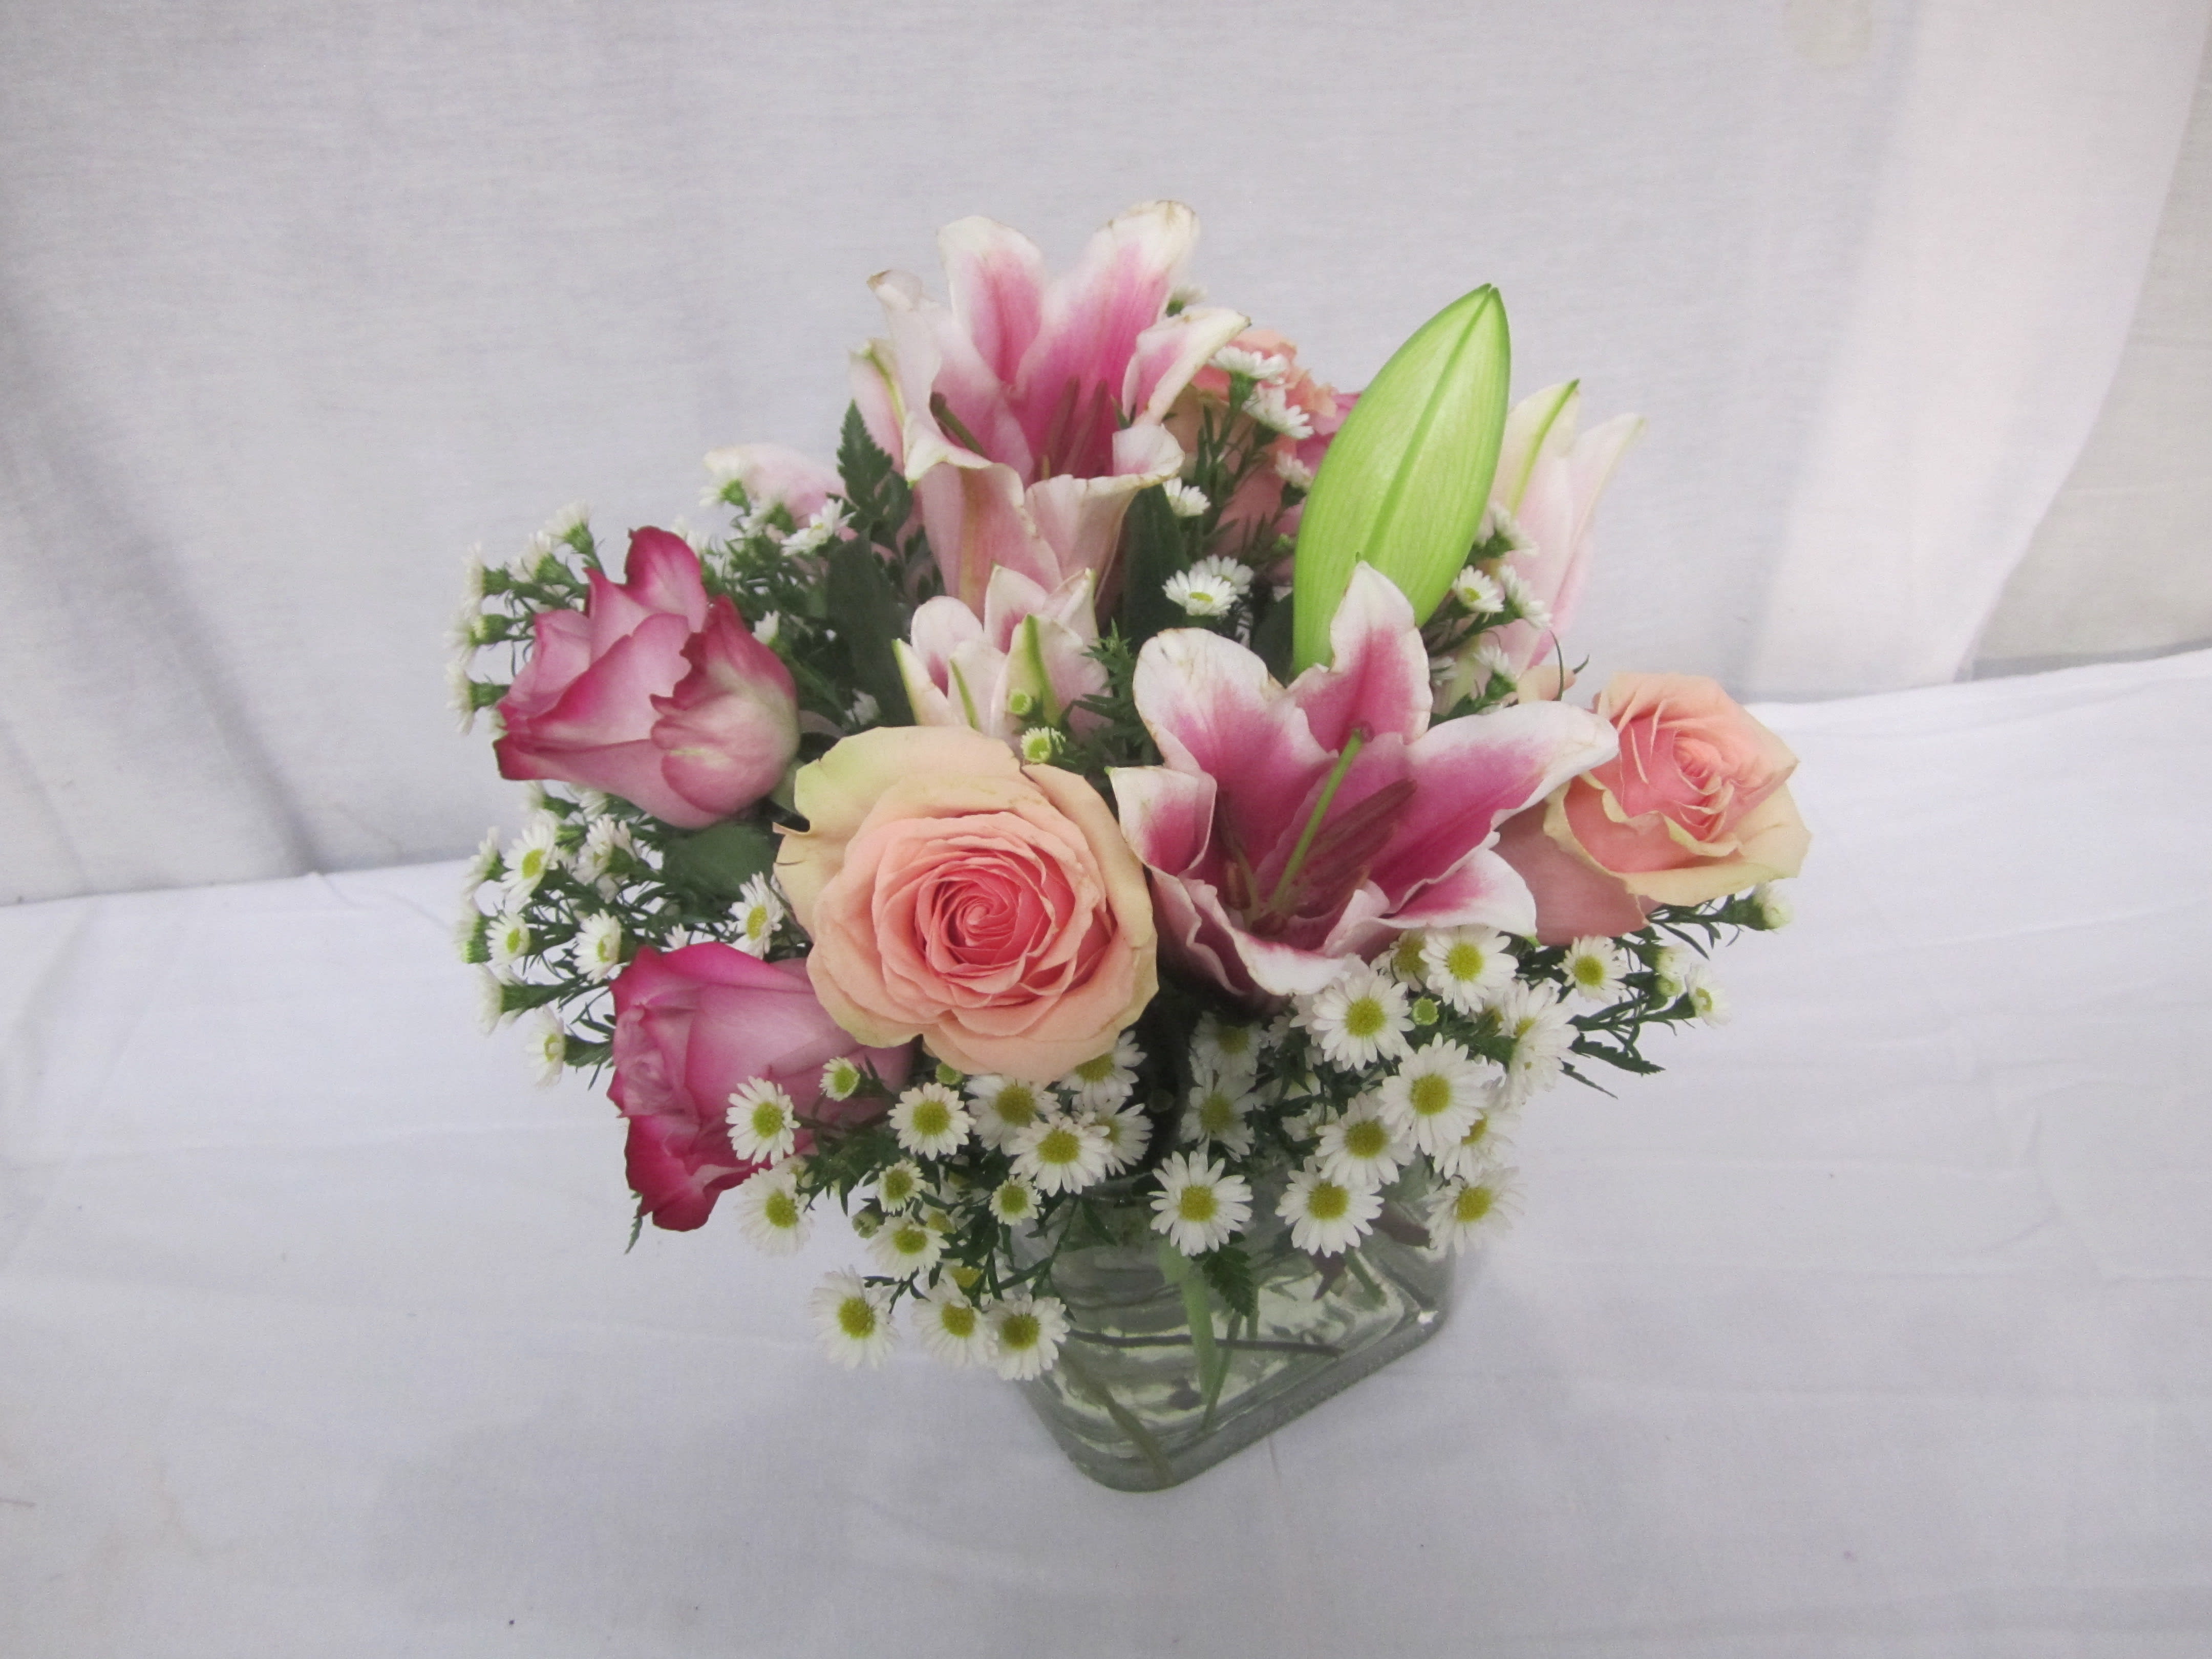 Subtle Sweetness - Harmonious colors delight the eyes, and sweet fragrance fills the air with this elegant composition of peach and pink tones of roses and lilies.  Attractive white aster surrounds the blossoms with softness. The graceful petals will elevate the senses with the calming beauty it bestows.